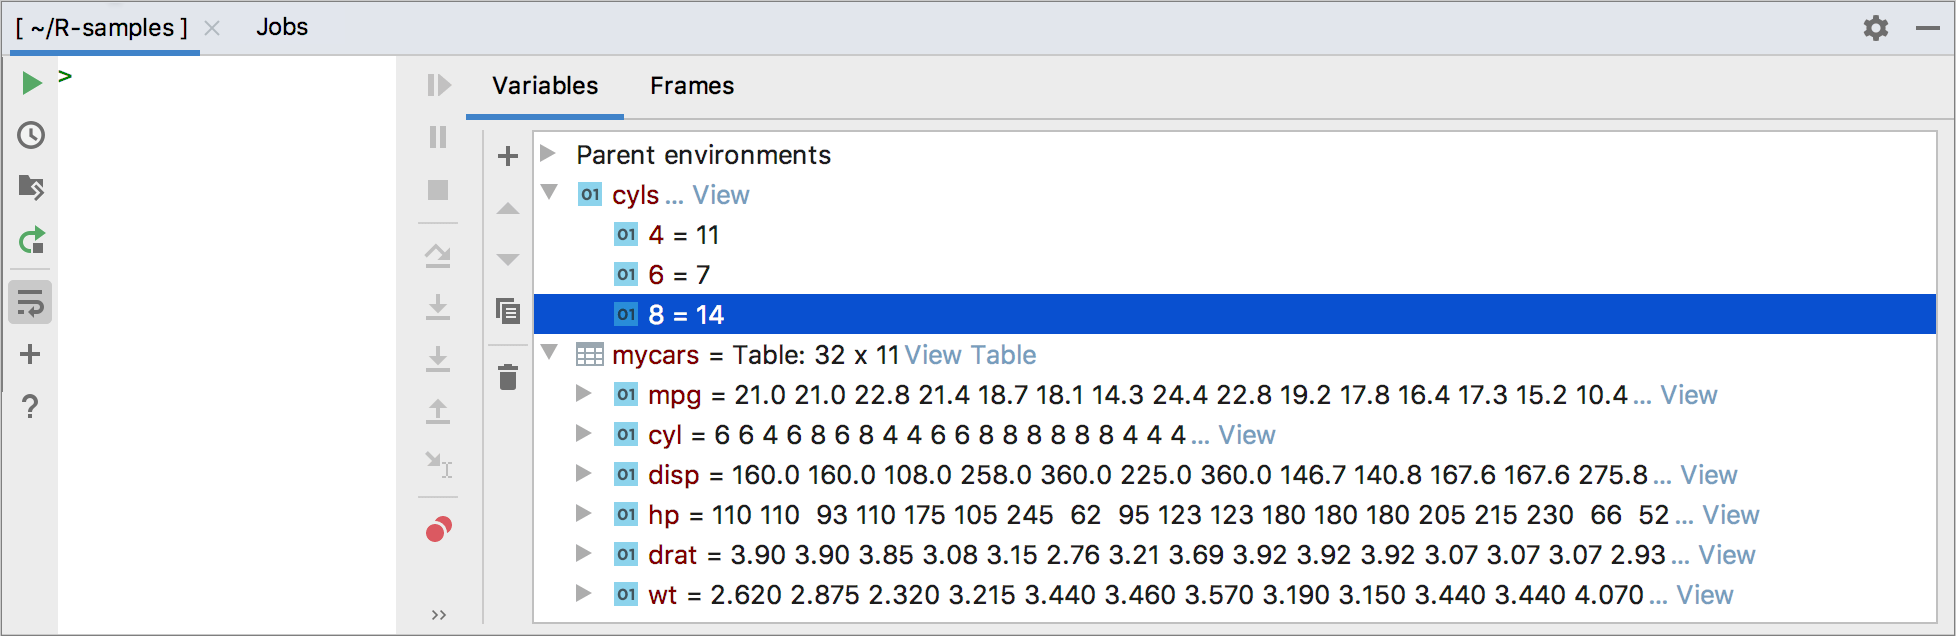 Preview variables in the R Console